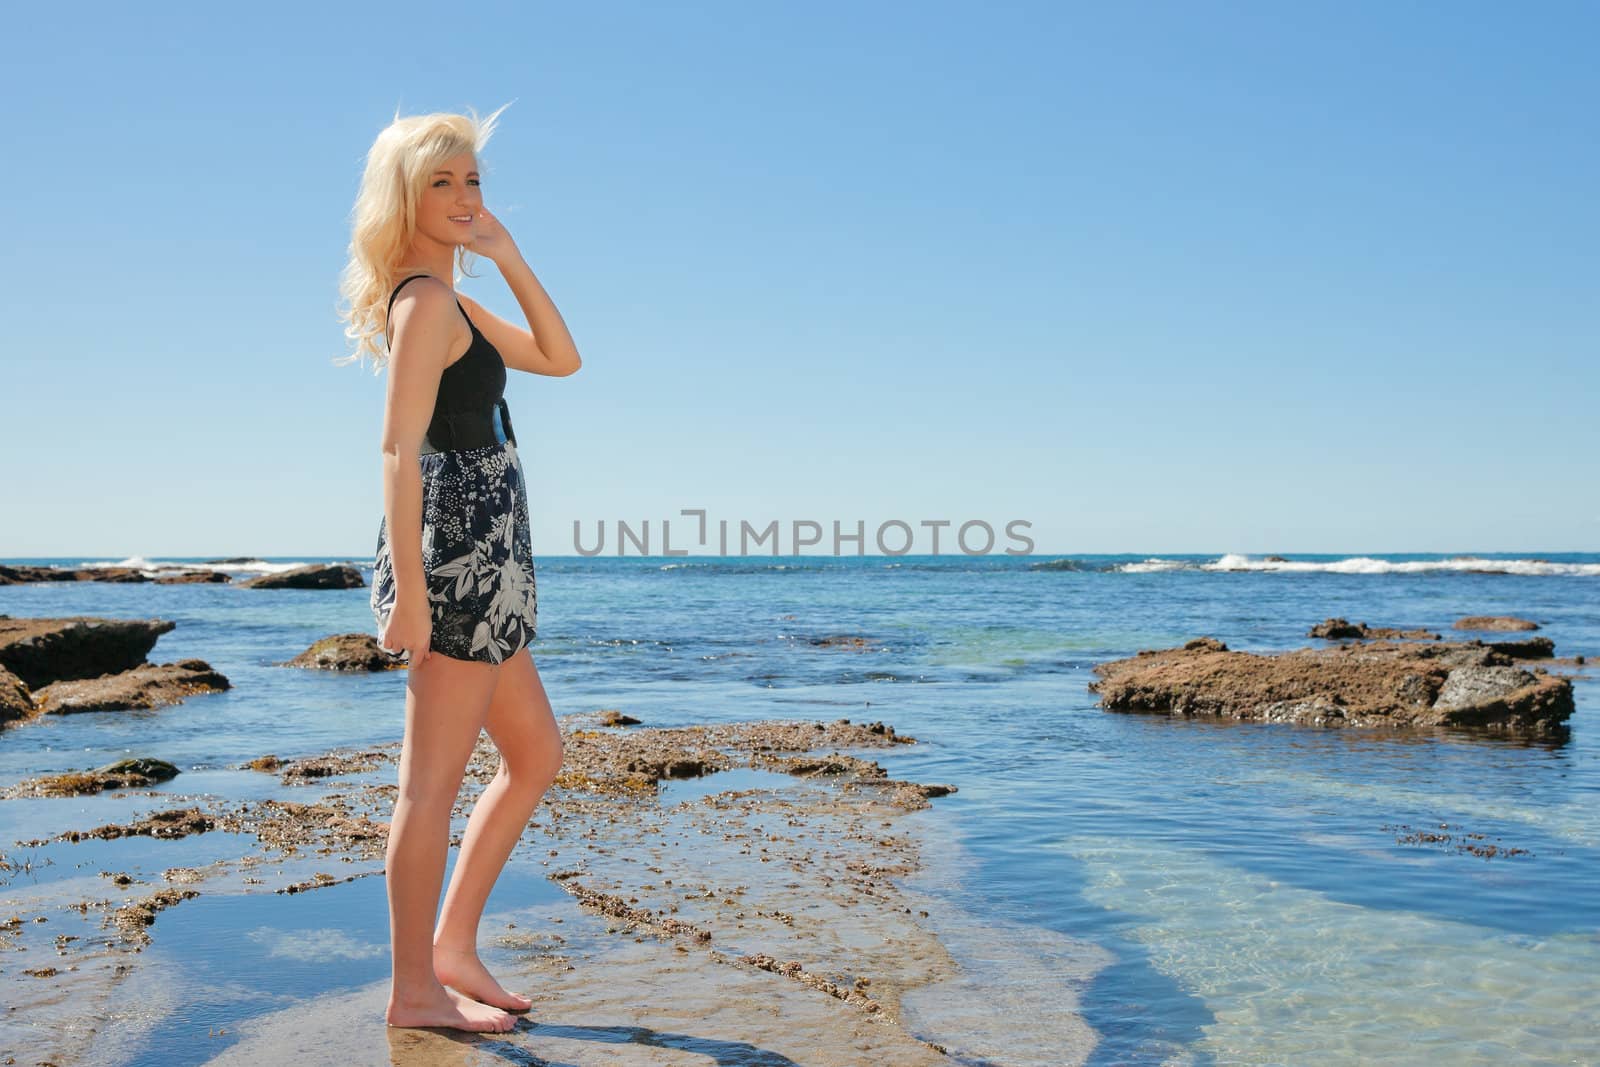 young woman enjoying summer at beach by clearviewstock